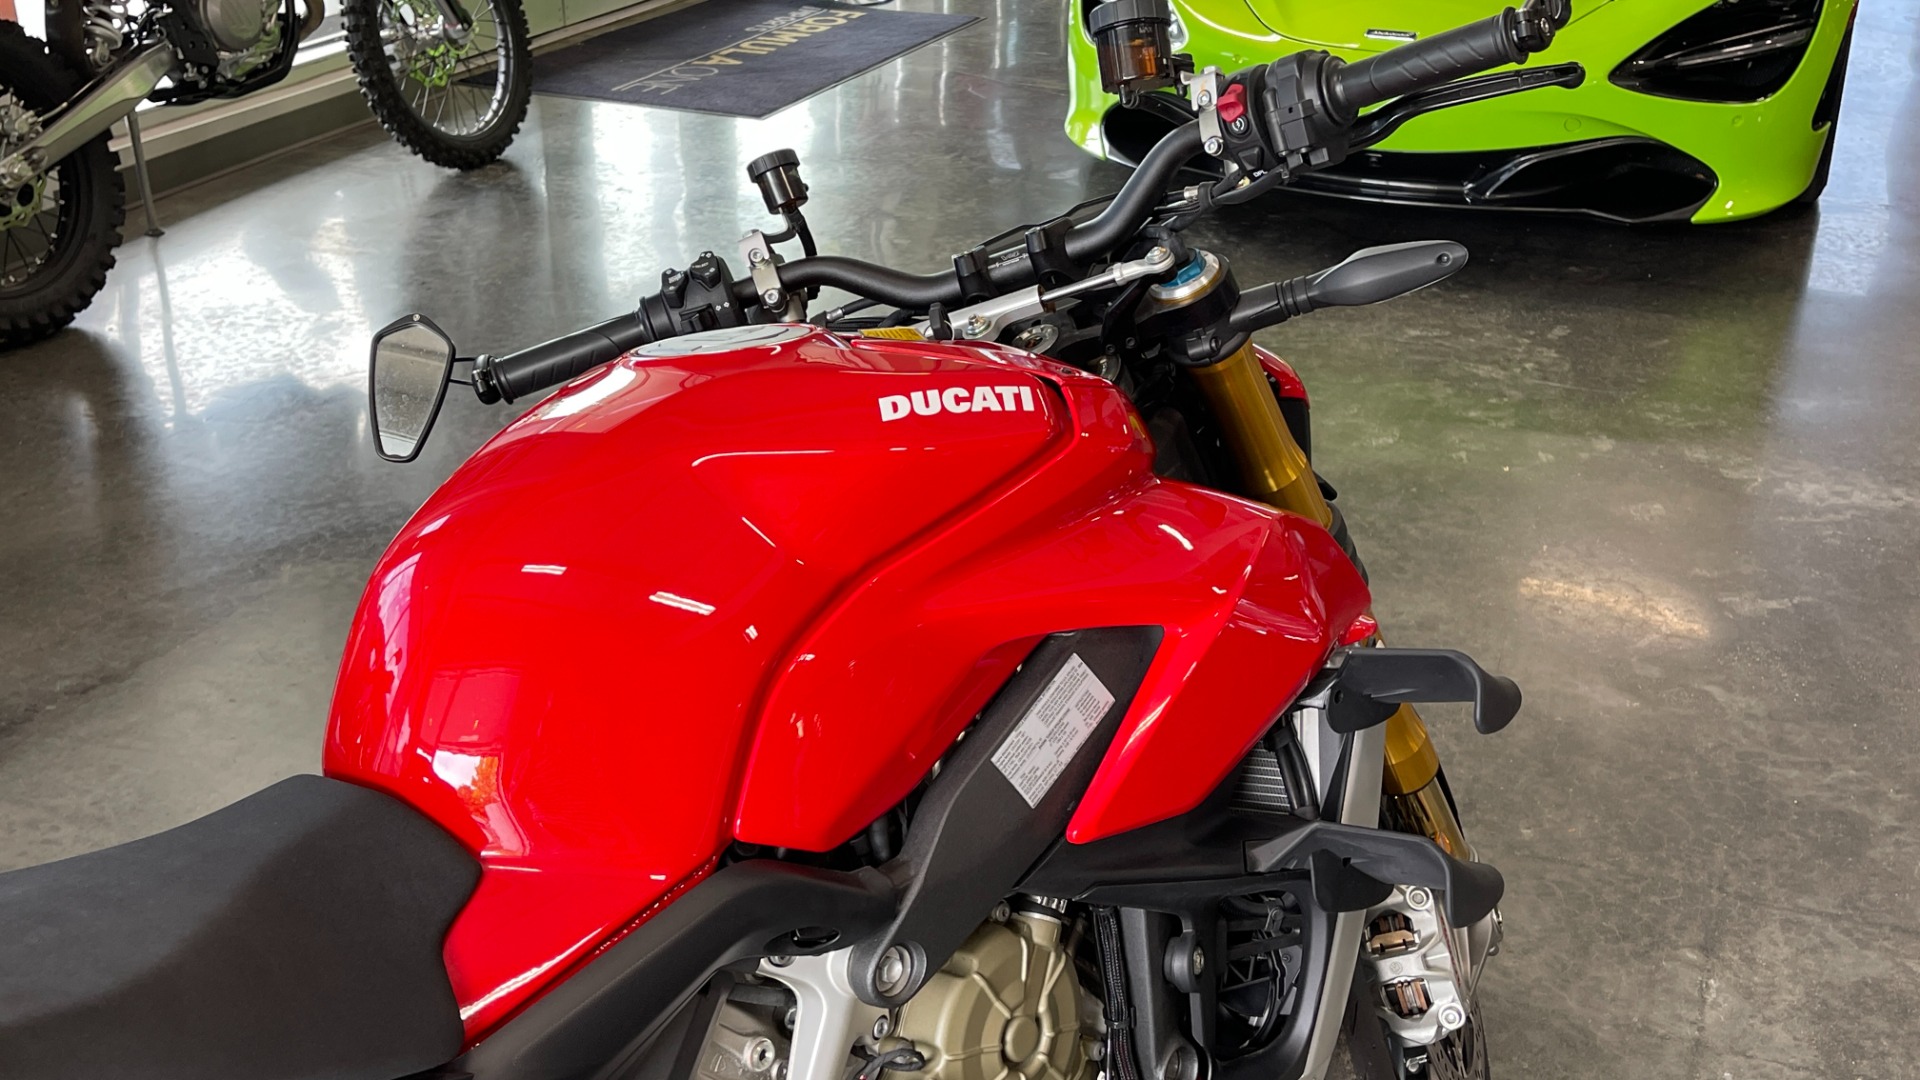 Used 2020 Ducati STREETFIGHTER V4S 1100CC MOTORCYCLE / 208HP (153 kW) / LIKE NEW for sale $24,599 at Formula Imports in Charlotte NC 28227 17